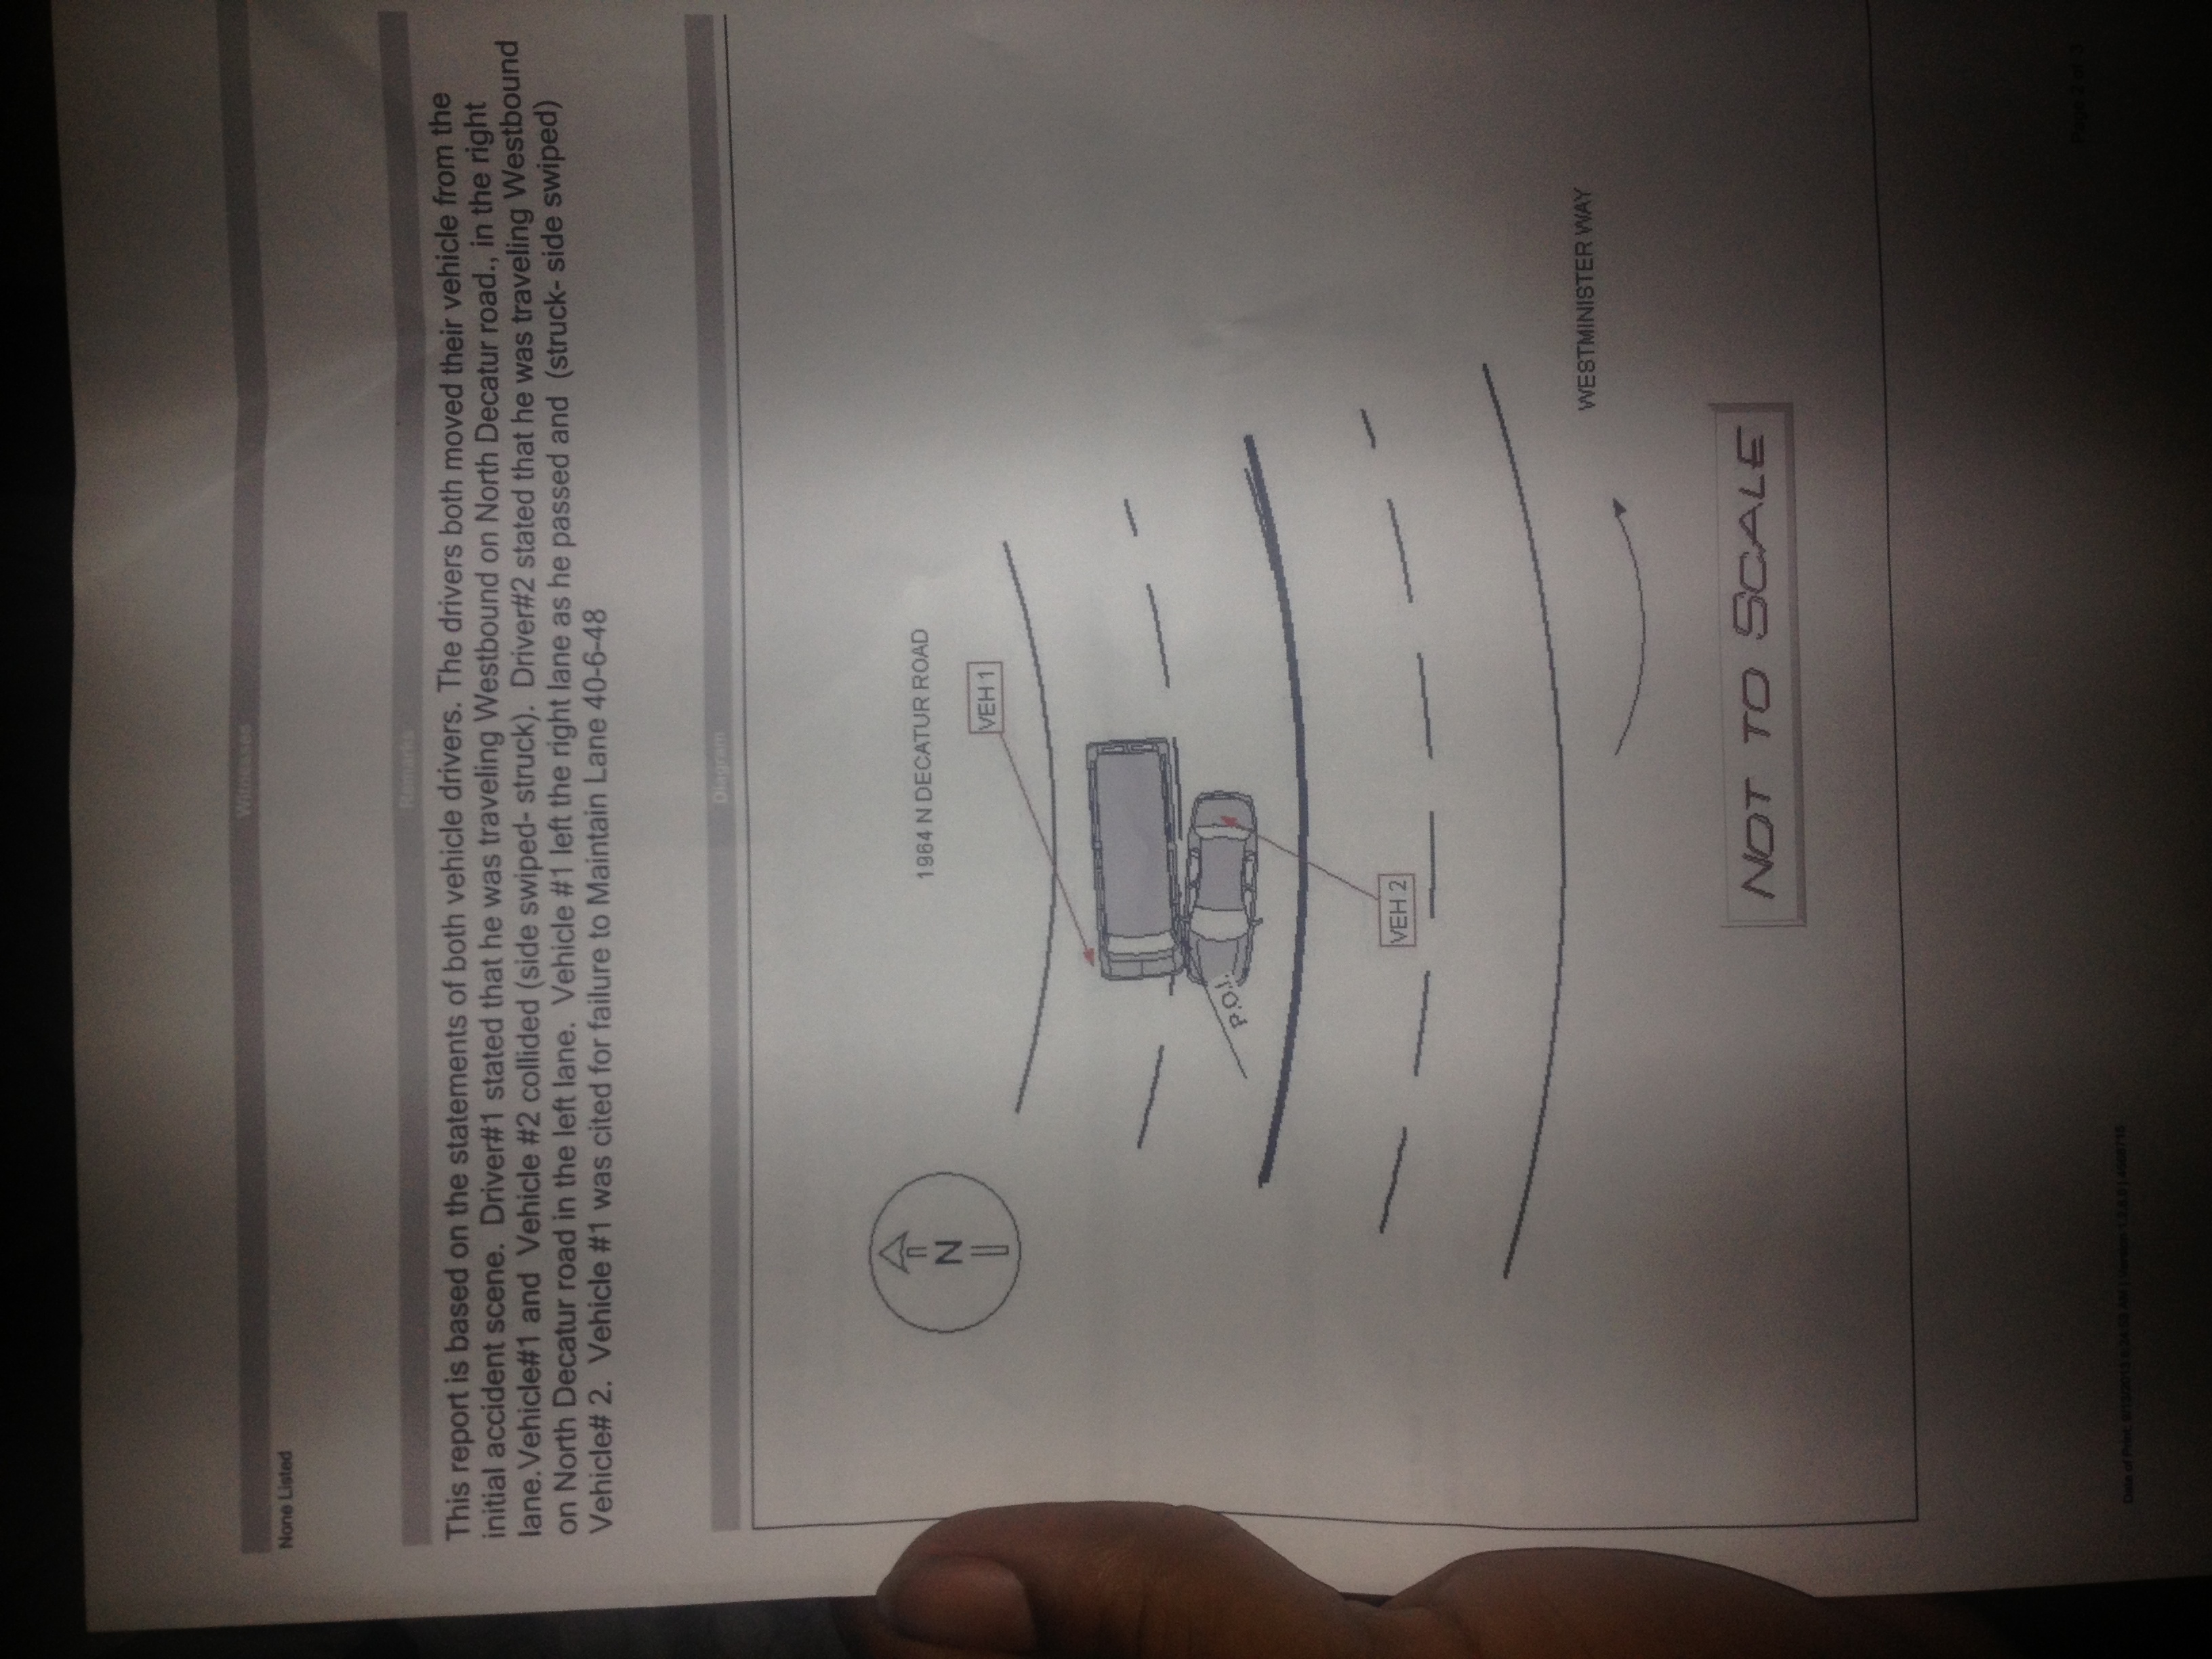 The second page of the police report, which is a diagram of how the accident occurred.